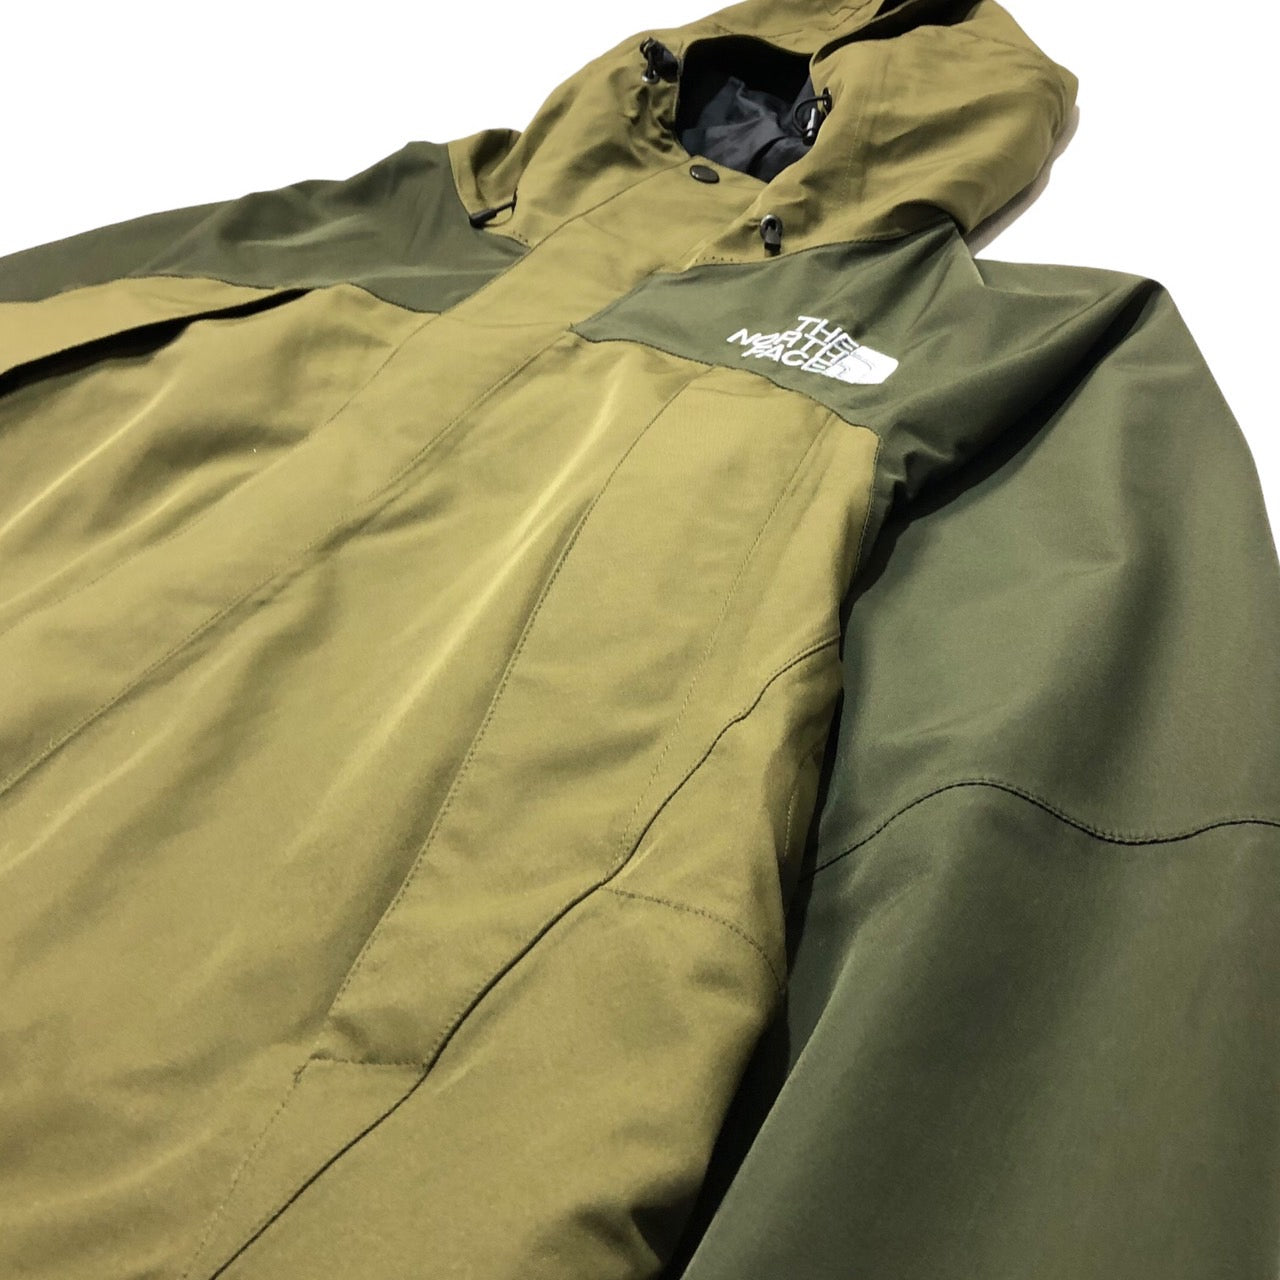 THE NORTH FACE(ザノースフェイス) GORE-TEX PRO SHELL MOUNTAIN ...